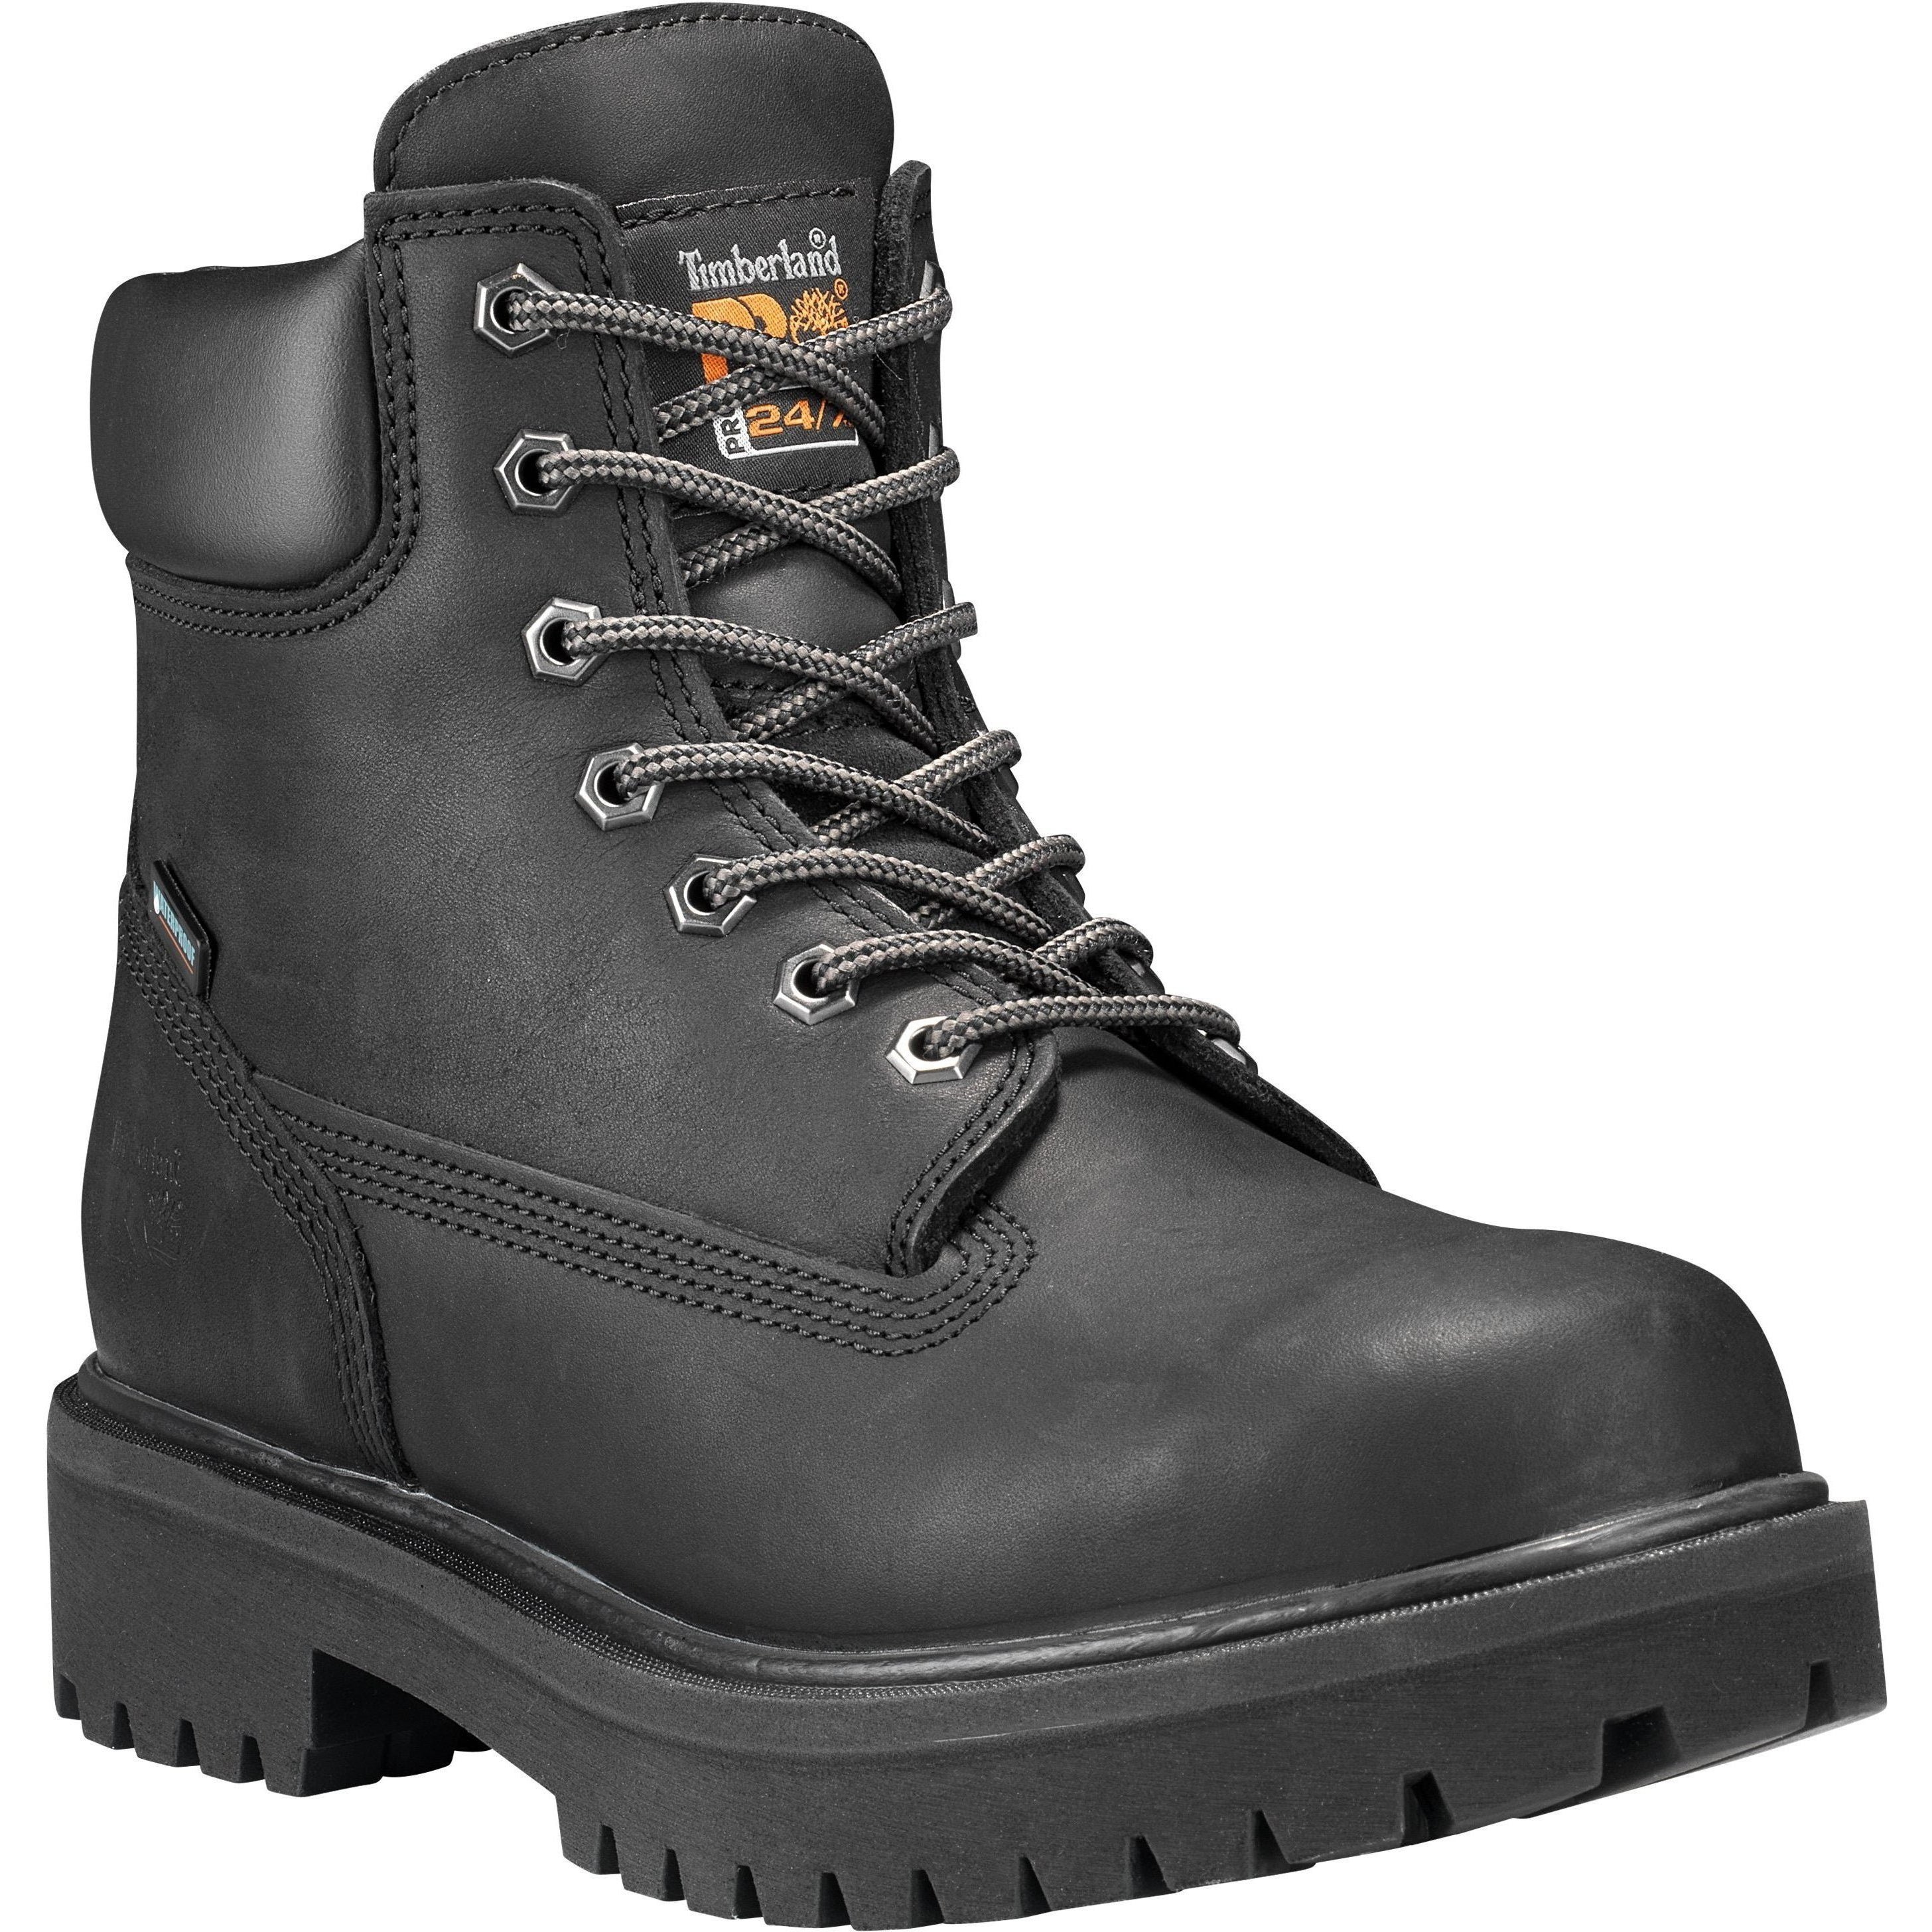 Timberland PRO Men's Direct Attach 6" Soft Toe Work Boot-TB126036001  - Overlook Boots